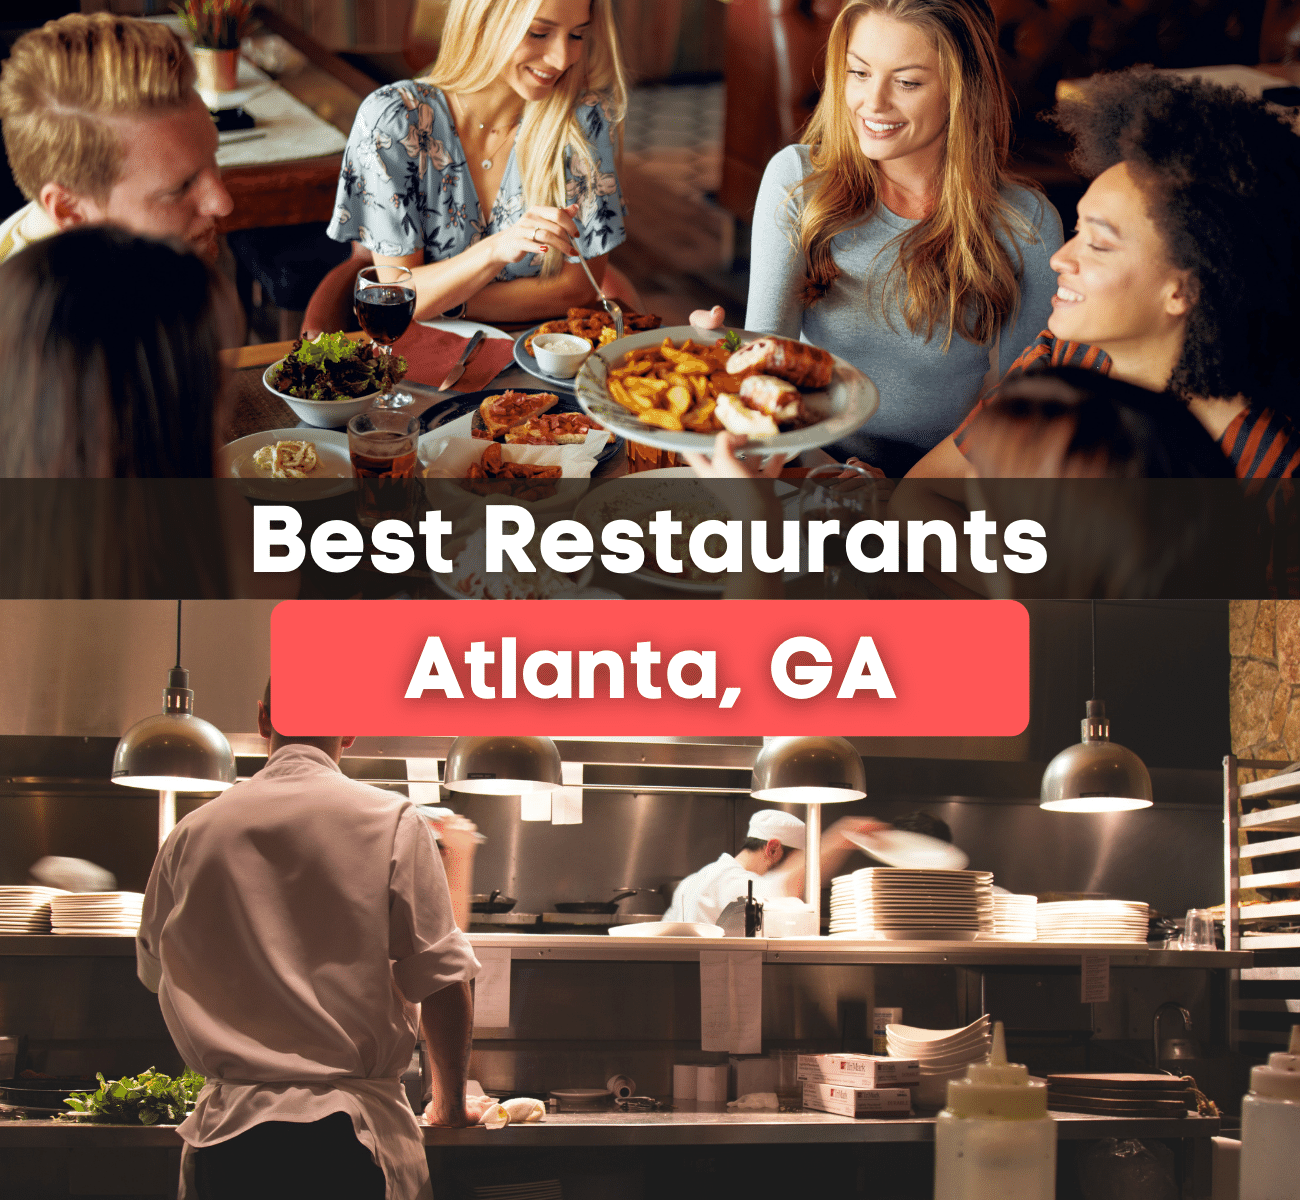 group of people eating and chef in a kitchen - best restaurants in Atlanta, GA